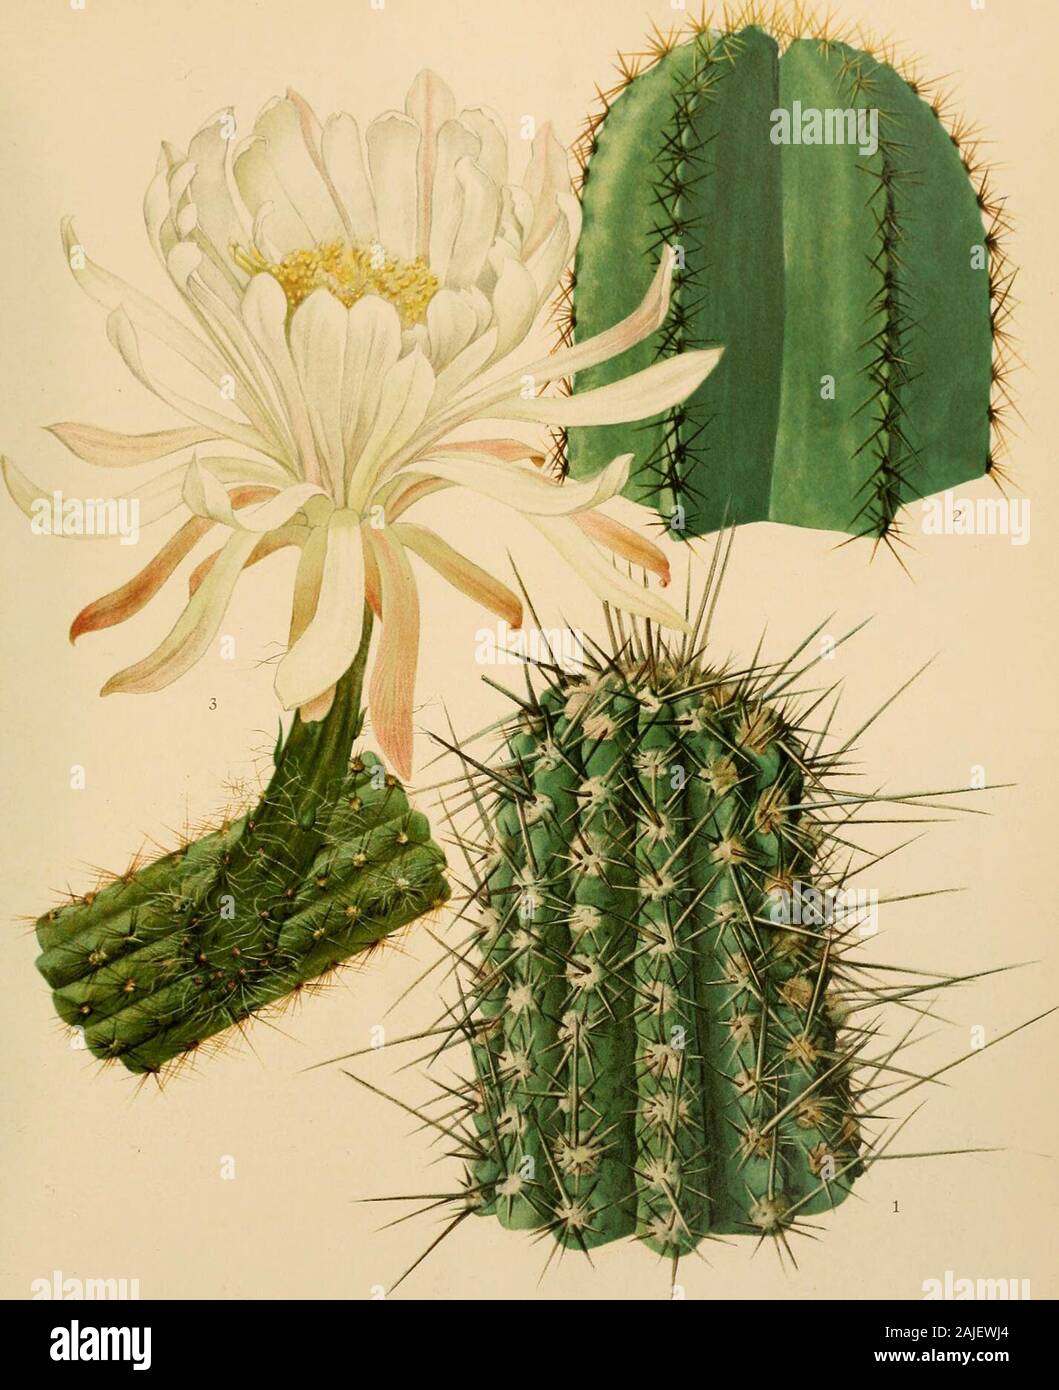 The Cactaceae : descriptions and illustrations of plants of the cactus family . Fig. 176.—Fruit of Nycto-cereus serpentinus. X0.7. Fig. 177.—Flower of Nycto-cereus hirschtianus. X0.7. BRITTON AND ROSE, VOL. II.. M E. Eaton del. 1. Top of branch of Eulychnia iquiquensis. 2. Top of stem of Lemaireocereus dumortieri. 3. Part of flowering stem of Nyctocereus serpenti?ius. (Natural size.) NYCTOCEREUS. 119 Known in Mexico as junco or junco cspinoso. Illustrations: Link and Otto, Ic. PI. Select, pi. 42, as Cactus serpcntinus; Bonpland,Descr. PI. Rares pi. 36; Van Geel, Sert. Bot. 3: pi. 17, the last Stock Photo